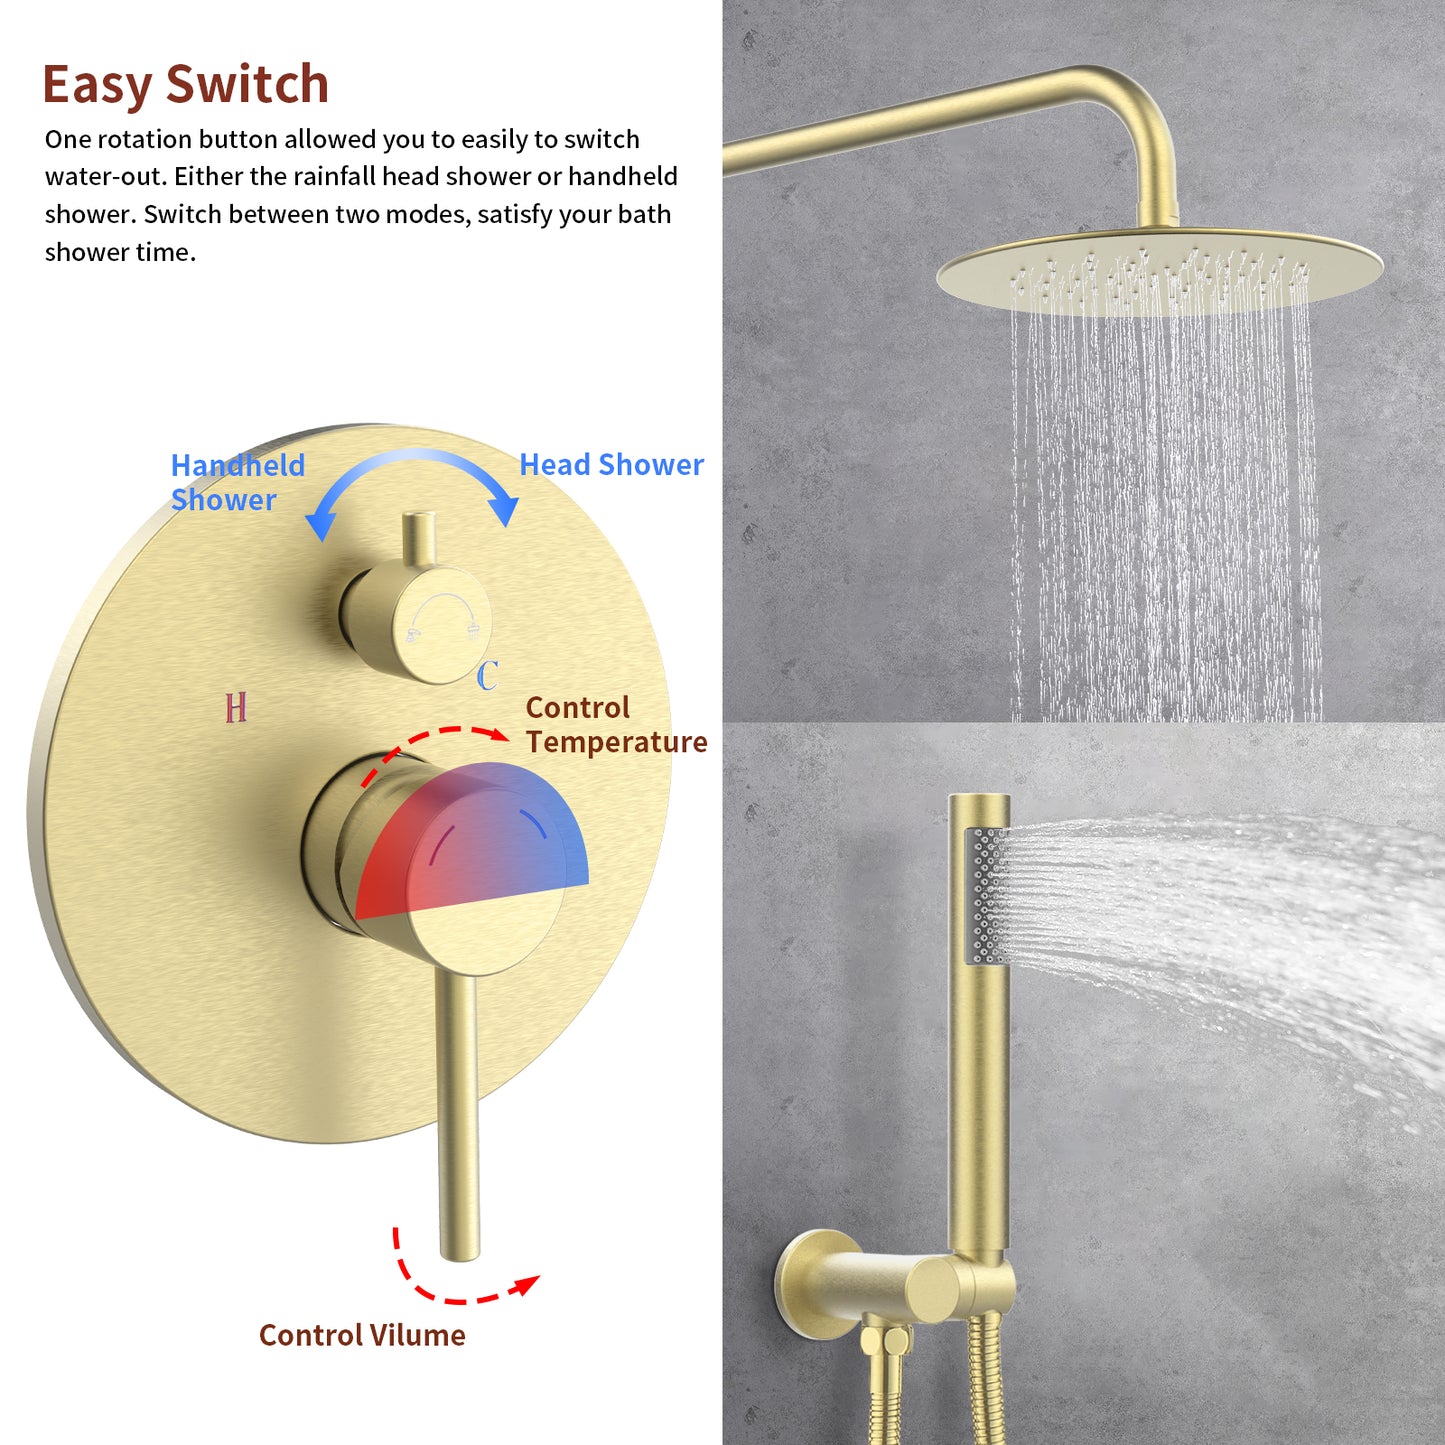 L-8001BG-Shower System Shower Faucet Combo Set Wall Mounted with 10" Rainfall Shower Head and handheld shower faucet, Brushed Gold Finish with Brass Valve Rough-In